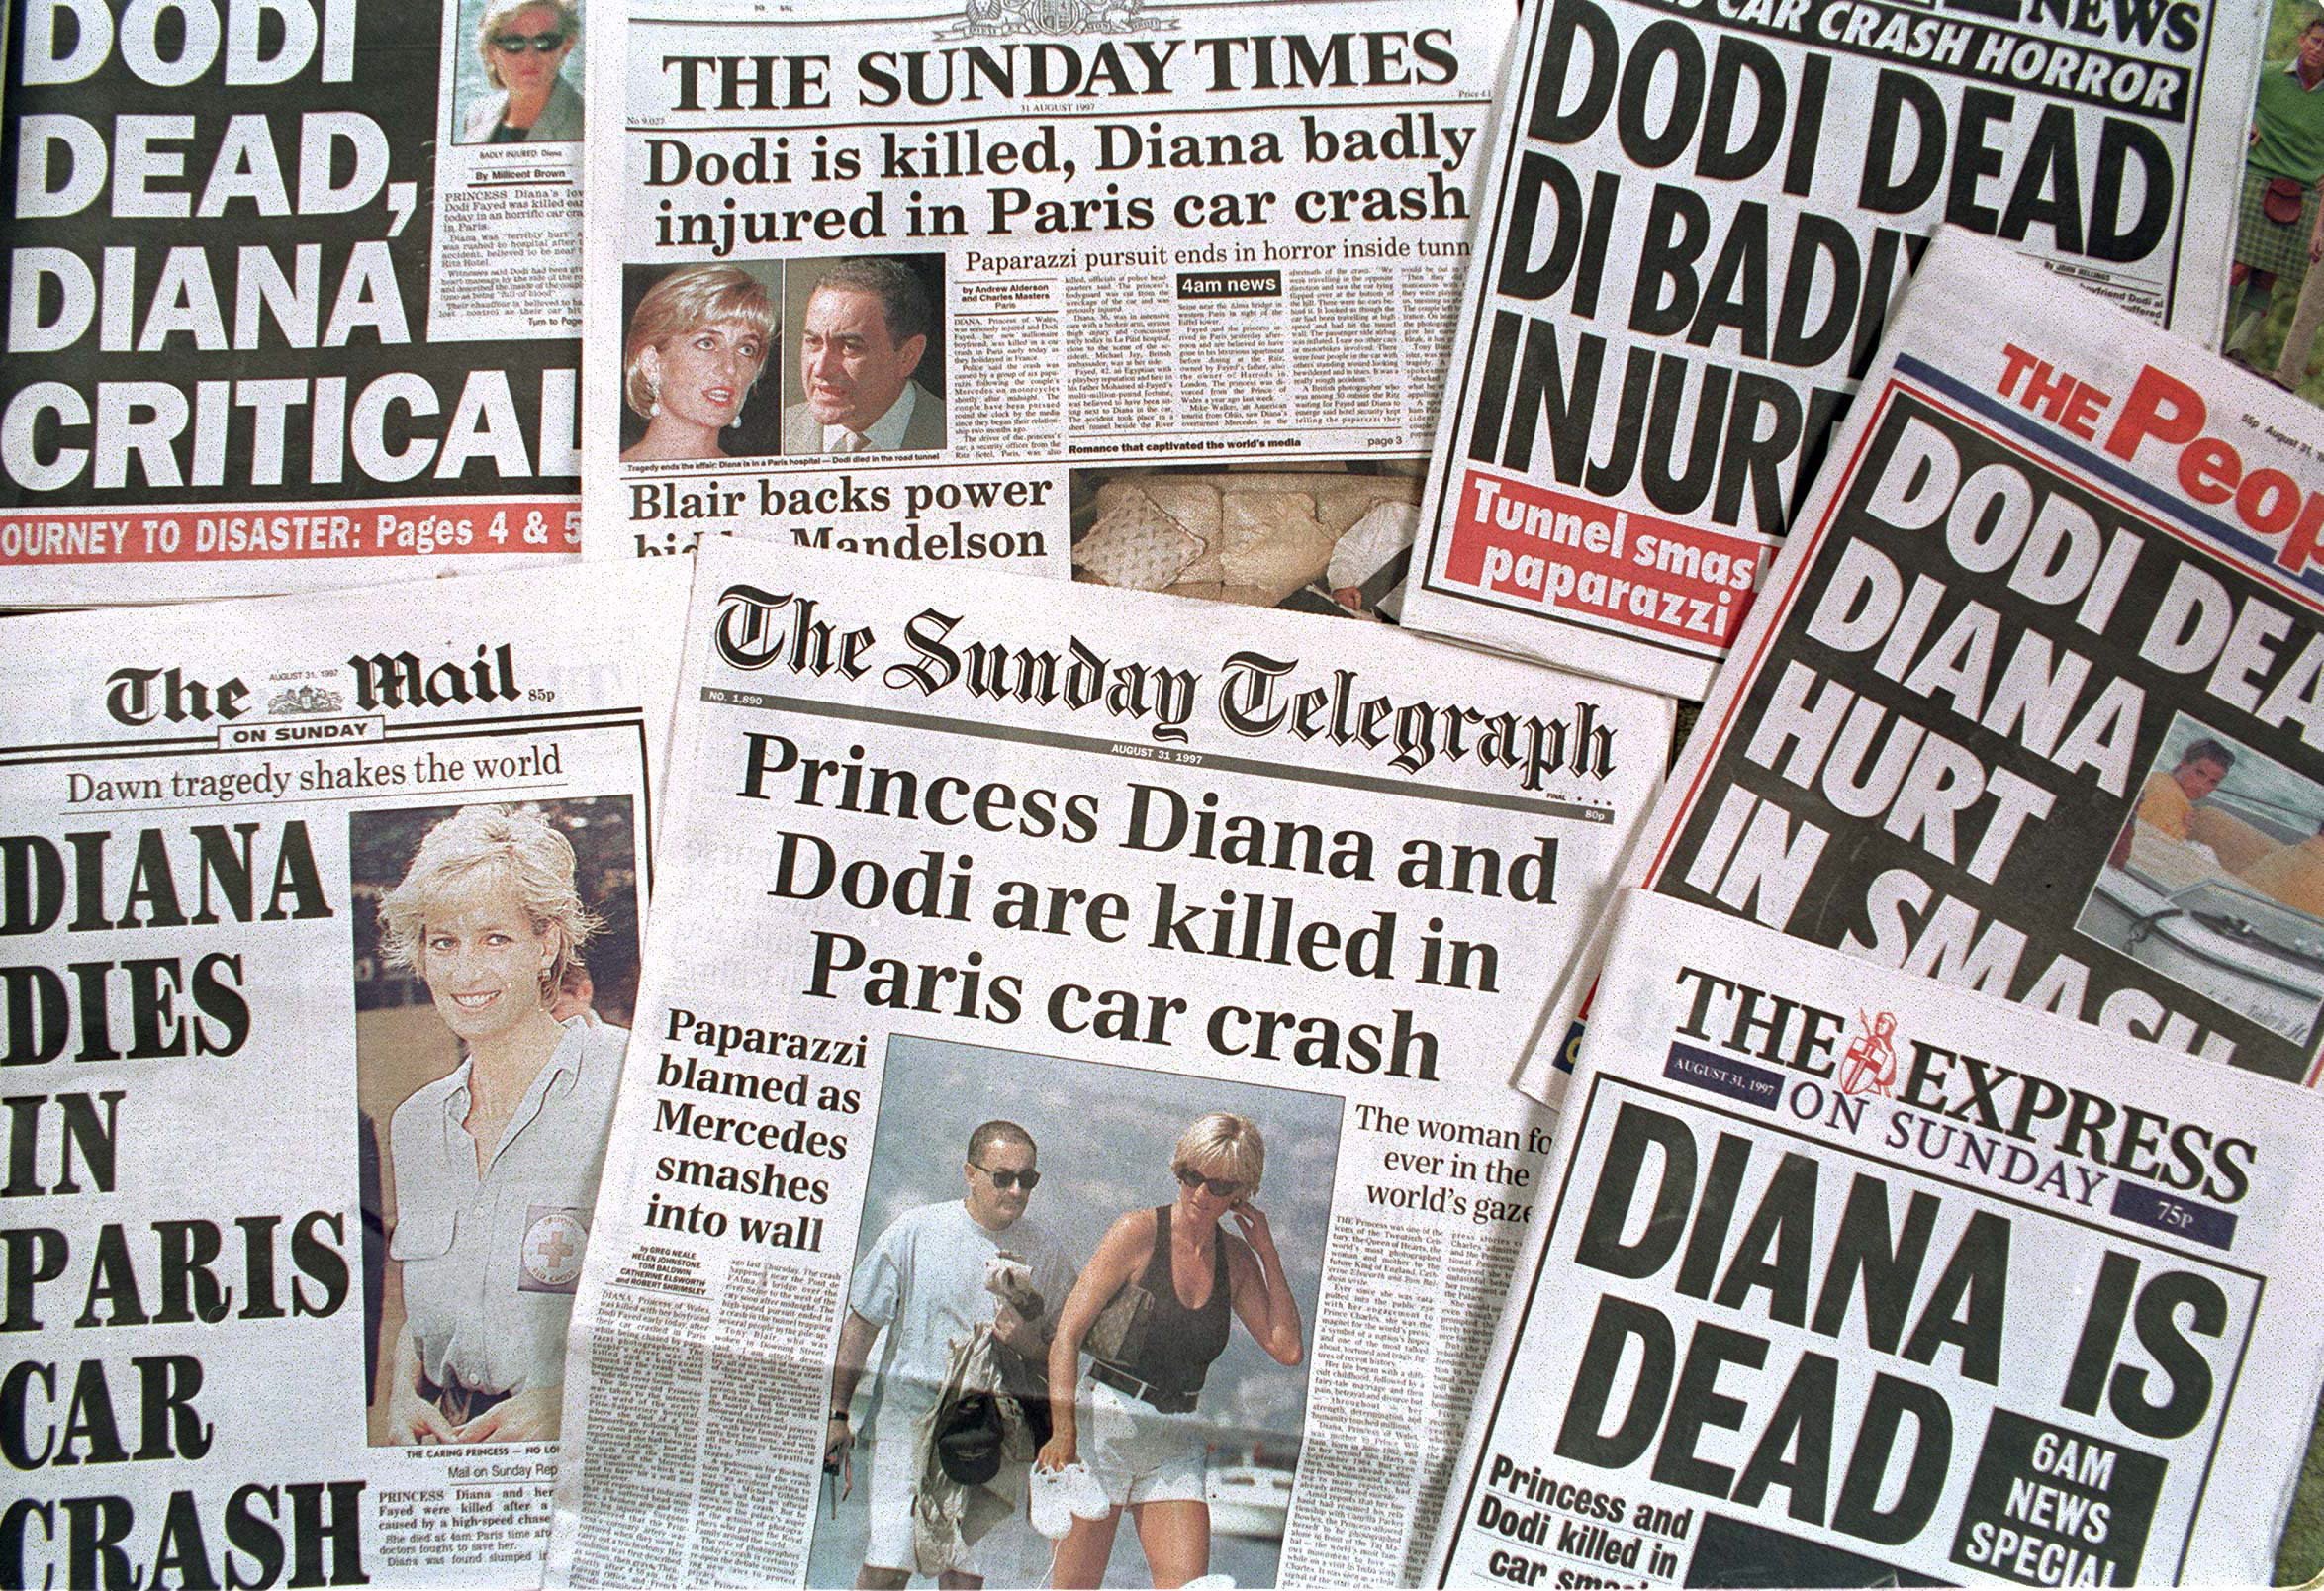 Newspaper Headlines Announcing The Death Of Princess Diana And Dodi Fayed In A Car Crash In Paris, 31st August 1997. Norholt, UK | Source: Getty Images